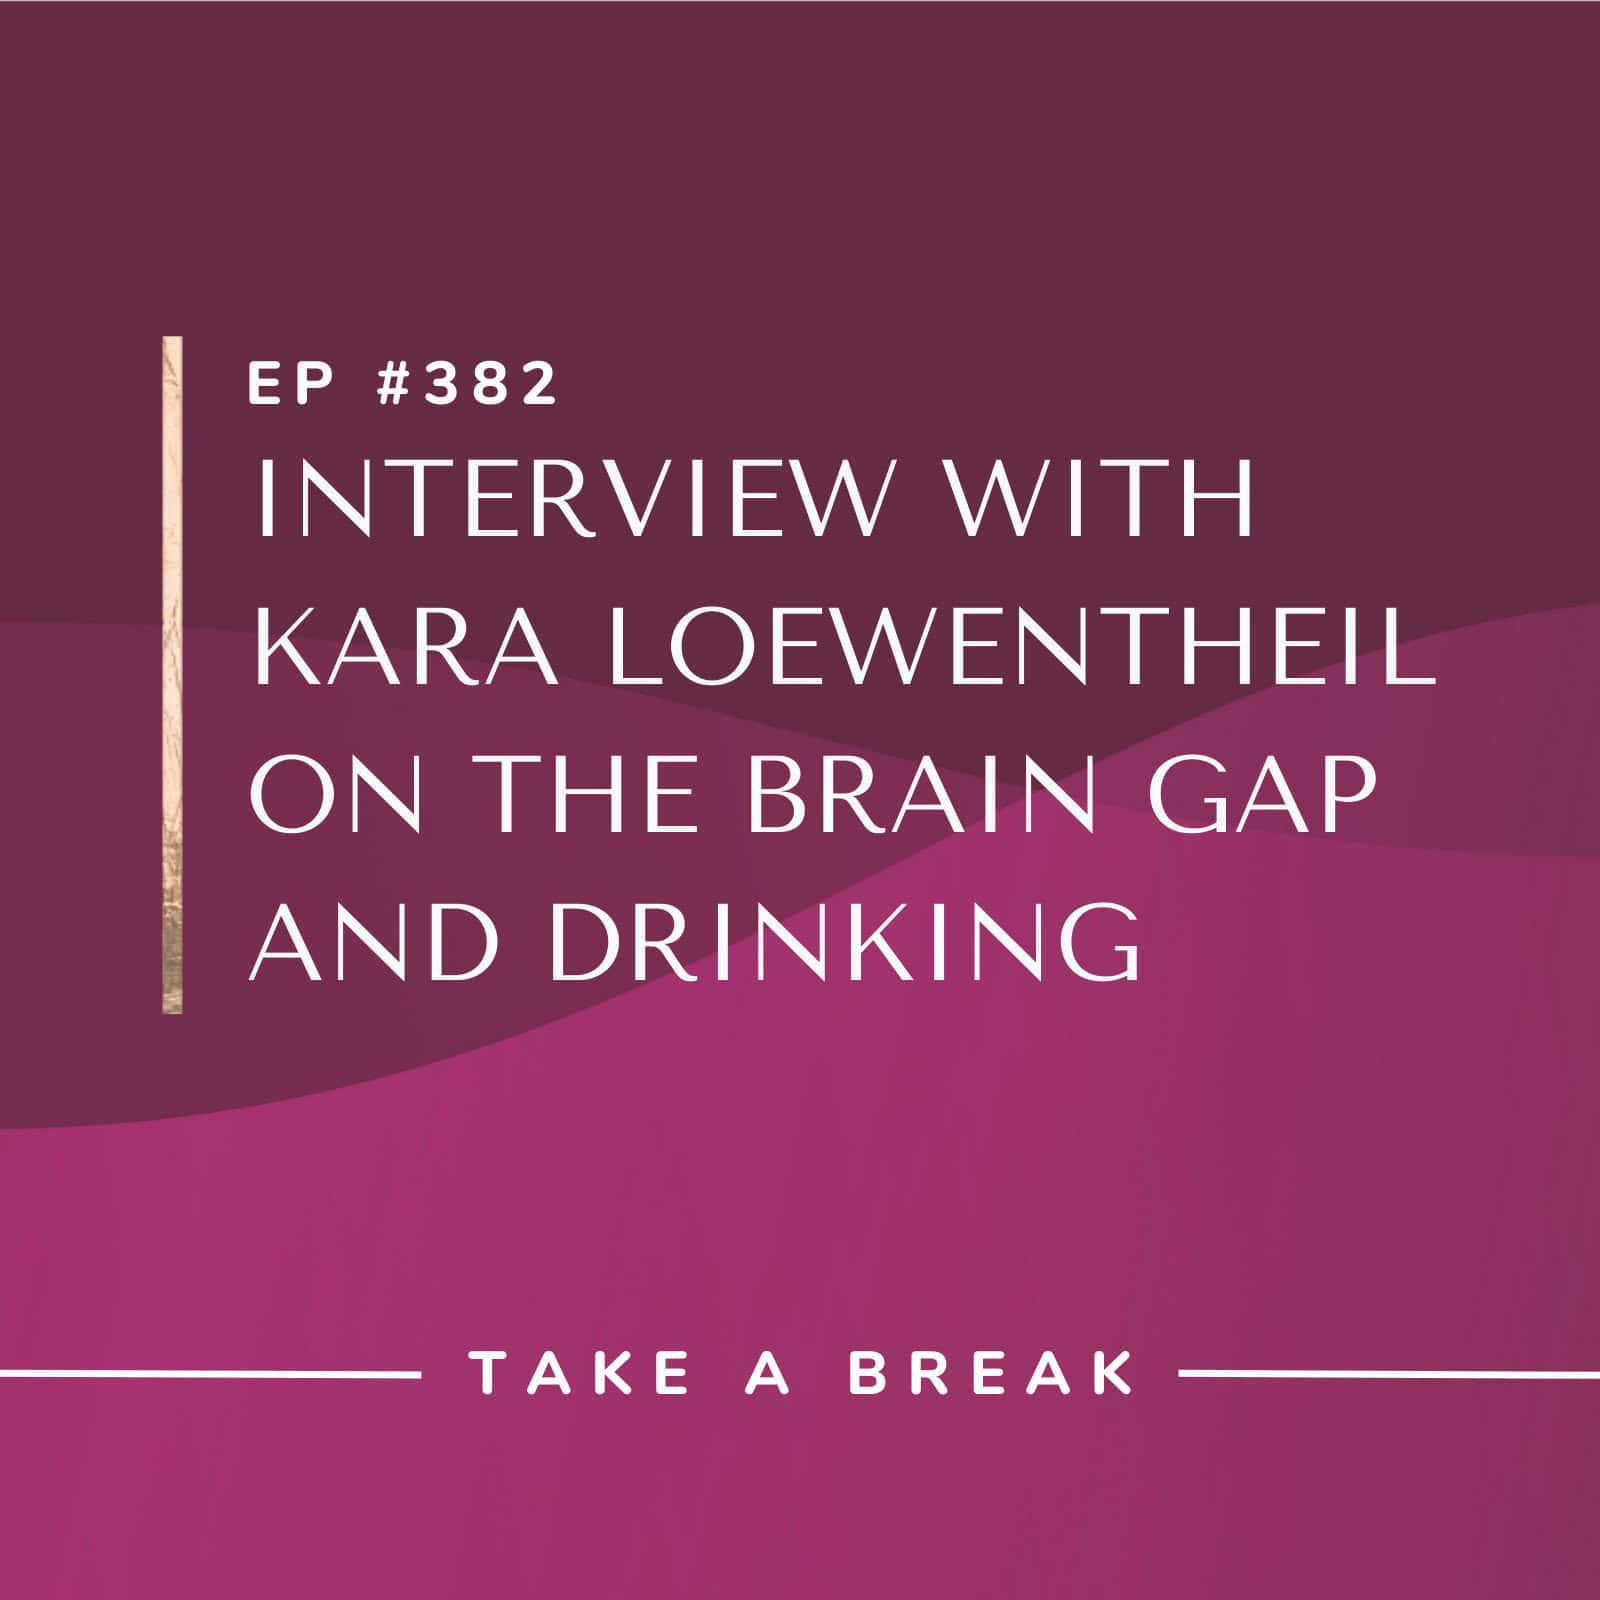 Take A Break from Drinking with Rachel Hart | Interview with Kara Loewentheil on The Brain Gap and Drinking